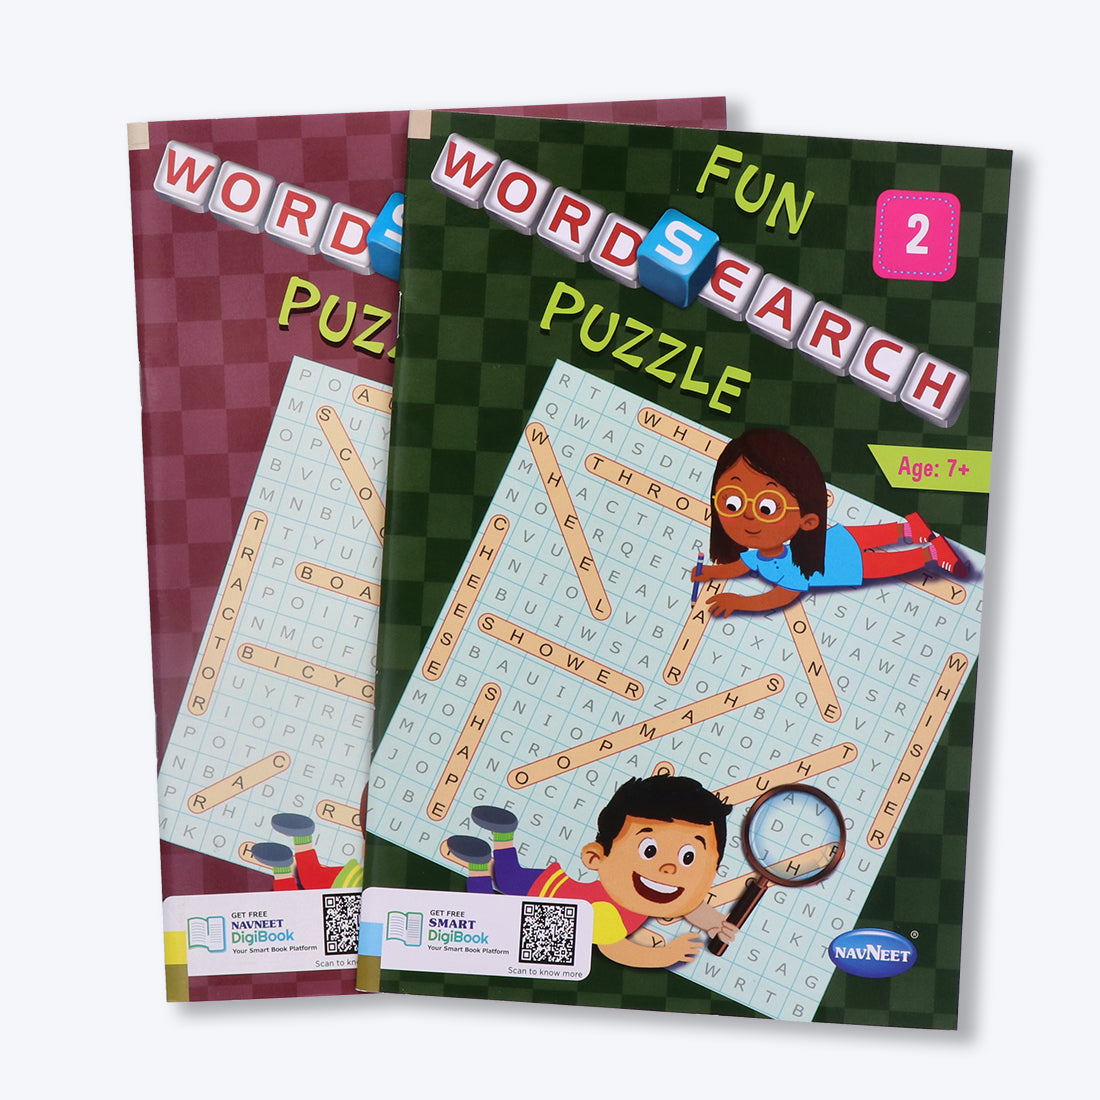 Navneet Fun word Search Puzzles - 1 and 2 Book- Word search and other puzzles book